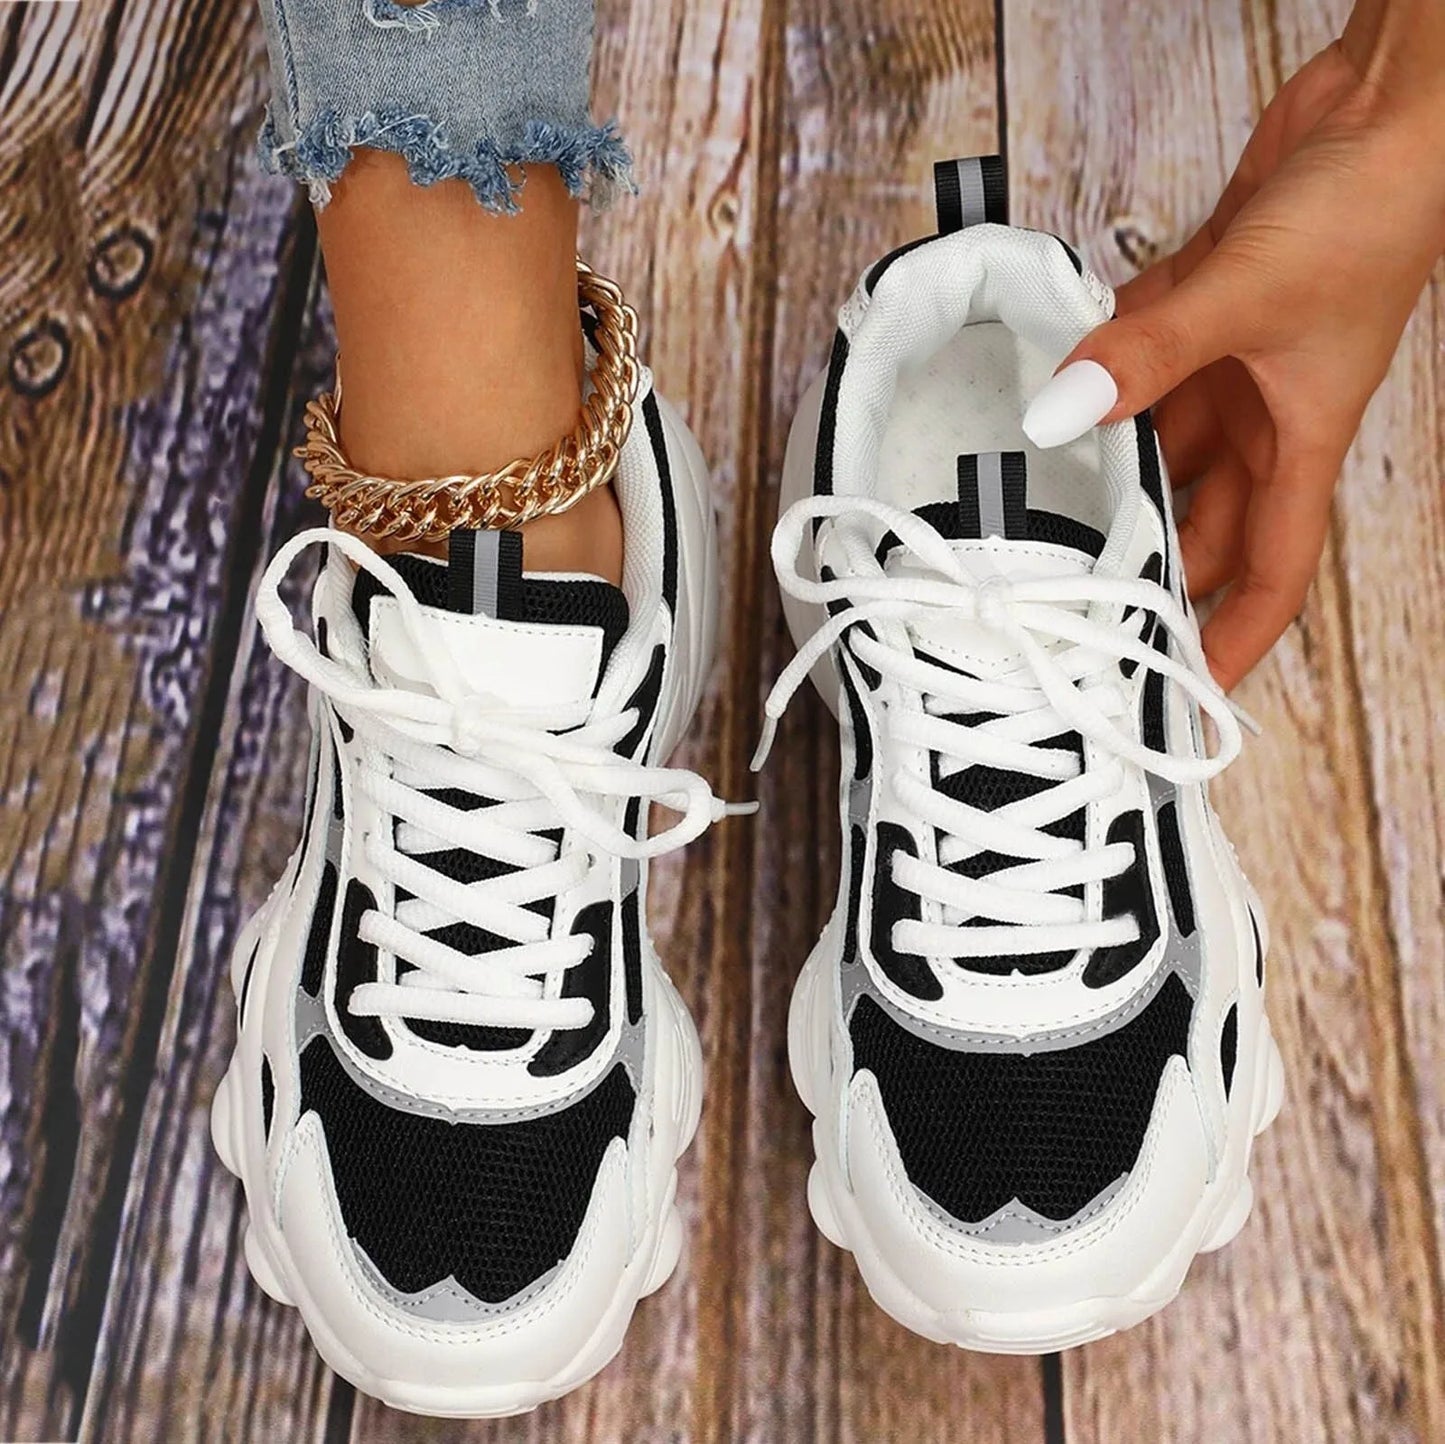 Womens Gymnastics Sneaker Women Lace Up Running Shoes/Sports Shoes White Sneakers Women Shoes Sandals